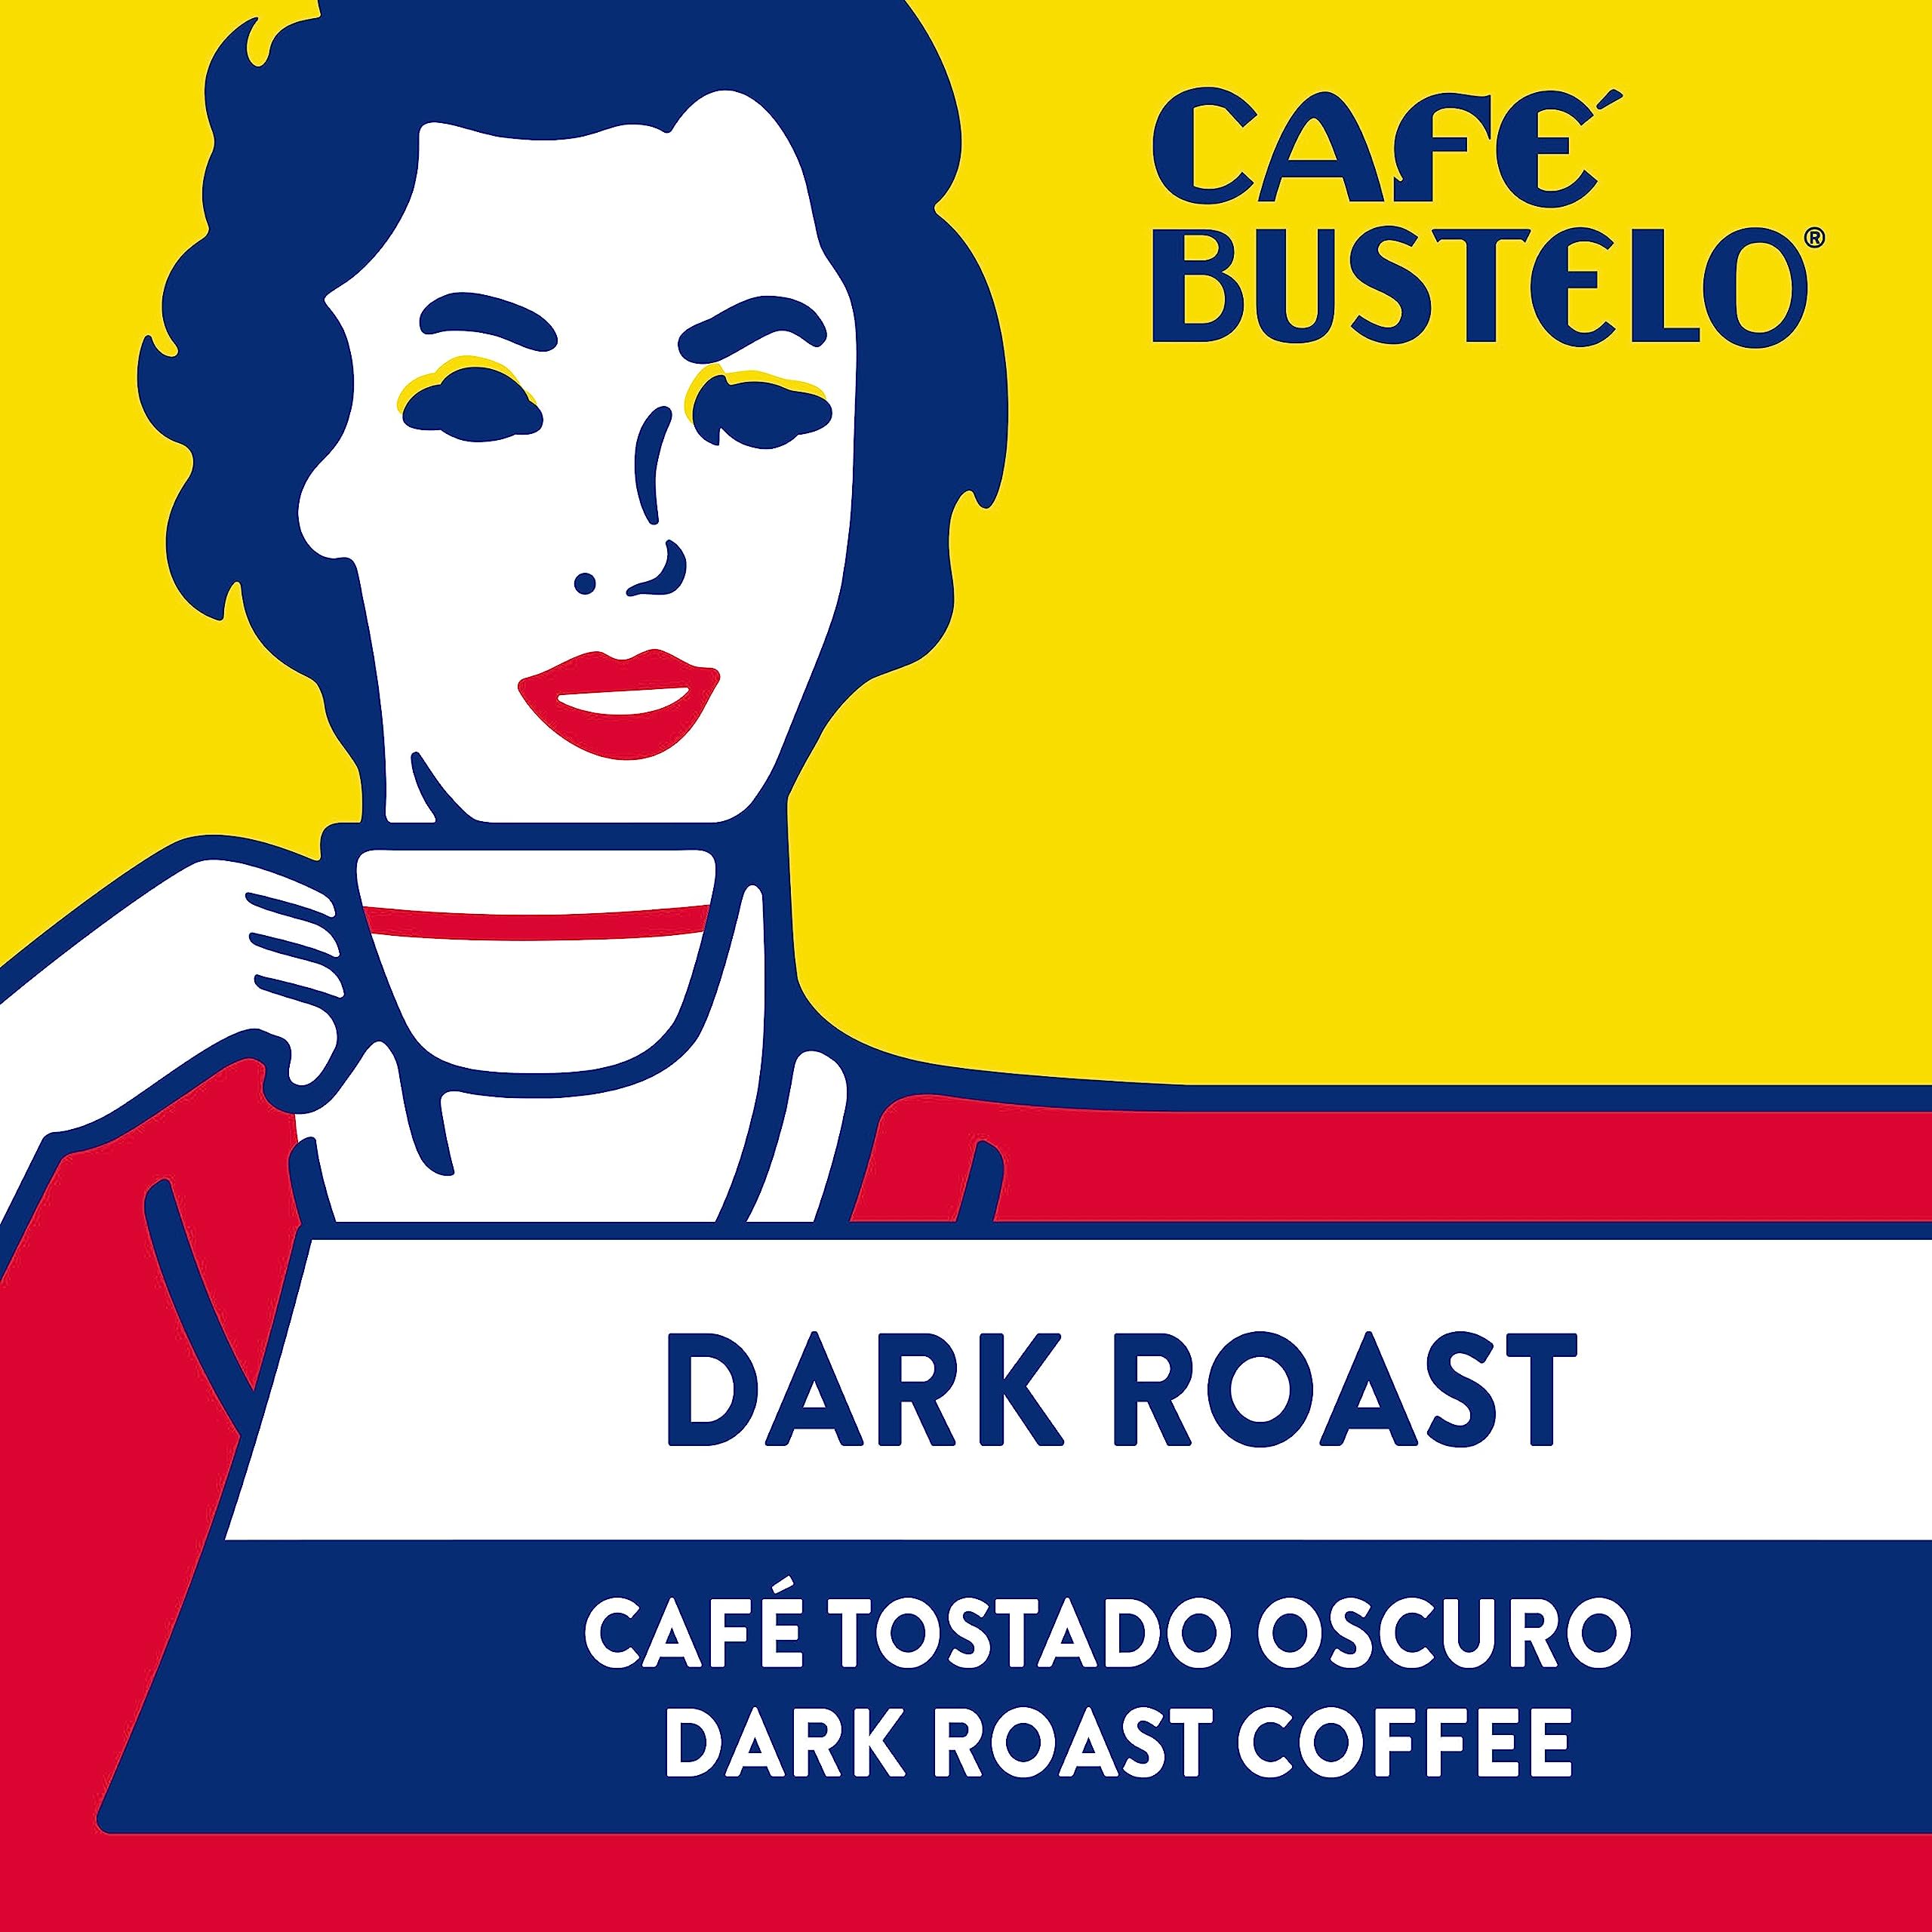 Café Bustelo Espresso Style Dark Roast Coffee, 96 Keurig K-Cup Pods $34.01 after Coupon or $27.20 w/ S&S